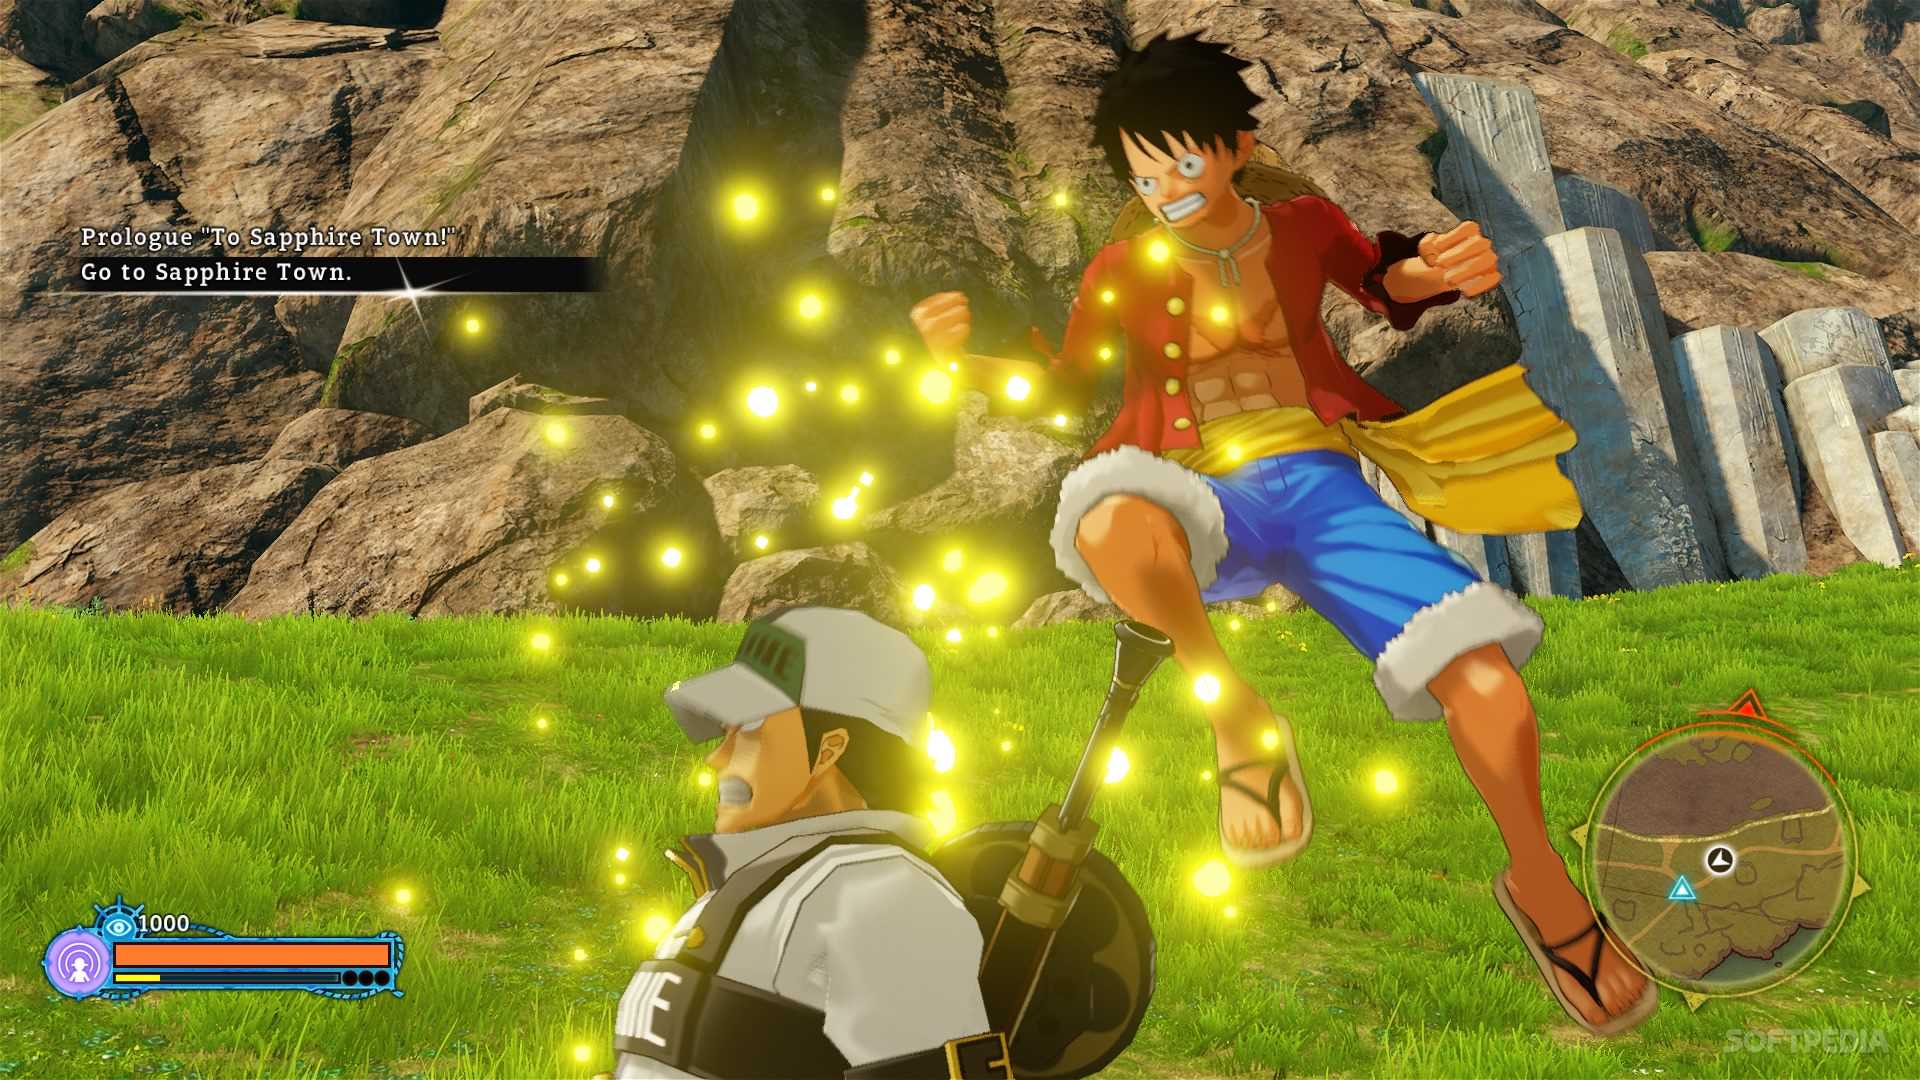 One Piece World Seeker Reportedly Released for Google Stadia Too